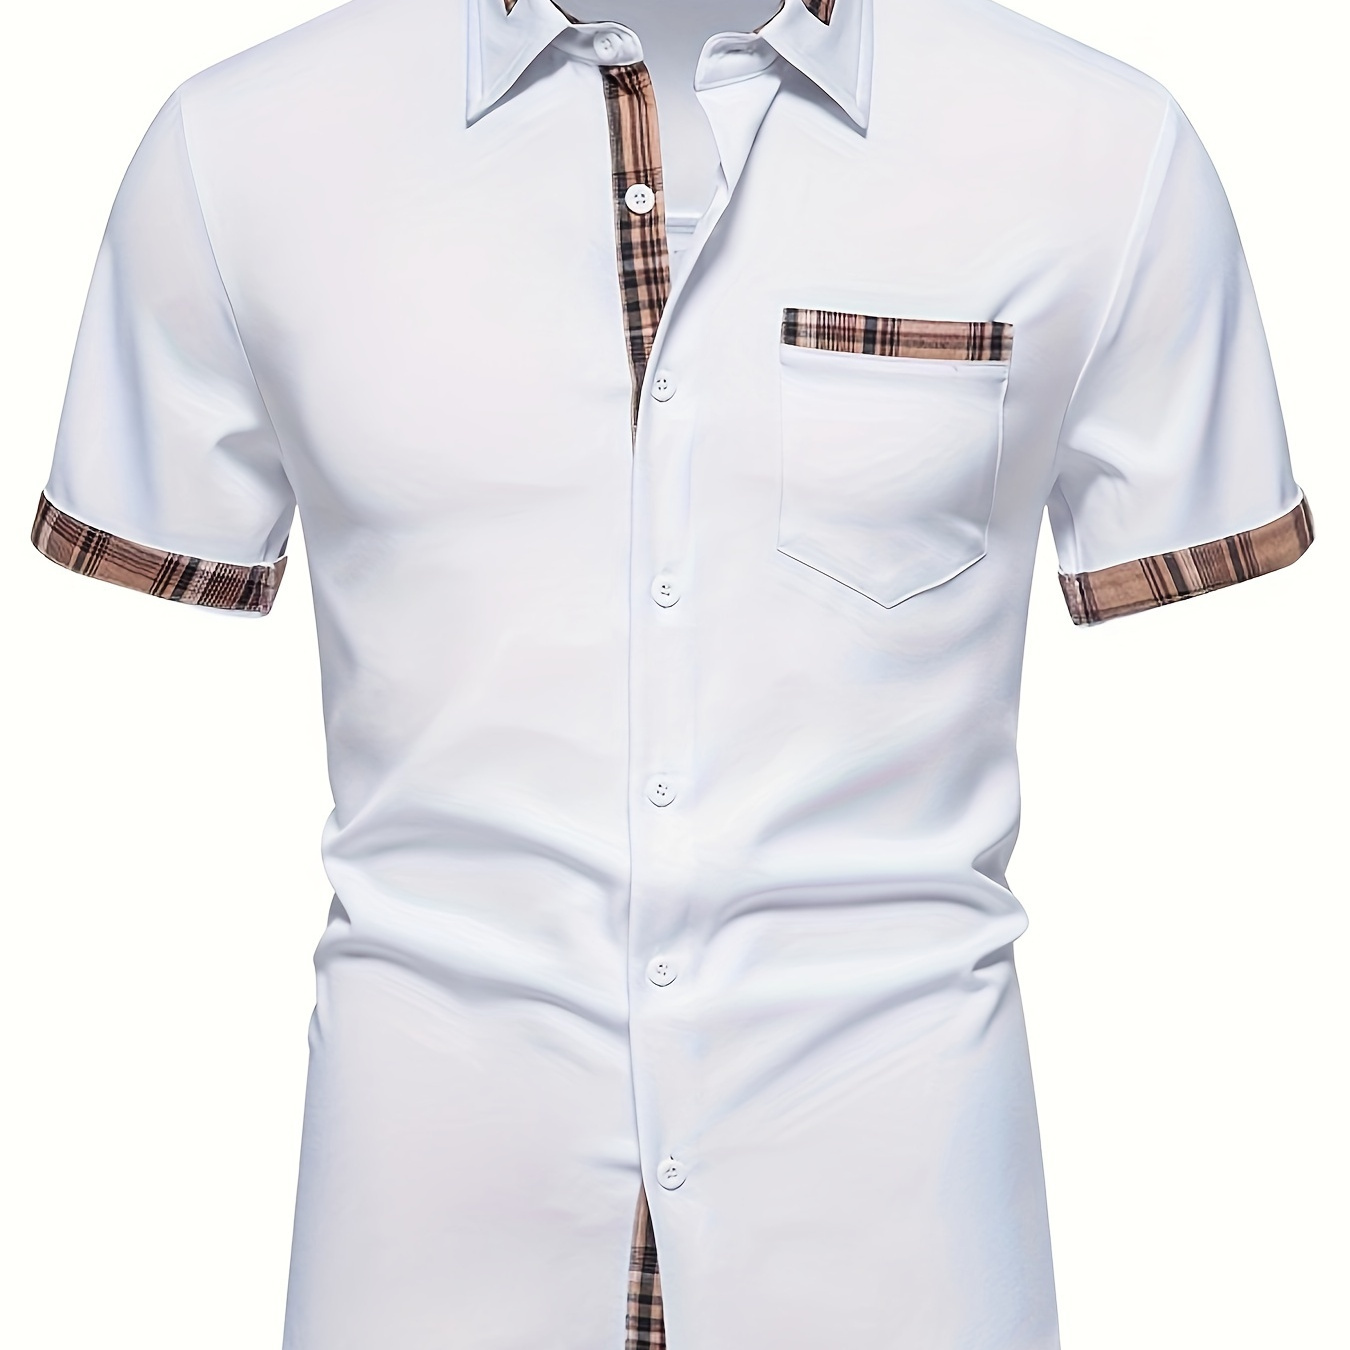 

Men's Casual Short Sleeve Button-up Lapel Slim Fit Dress Shirt With Plaid Collar And Cuff, Formal Work Wear